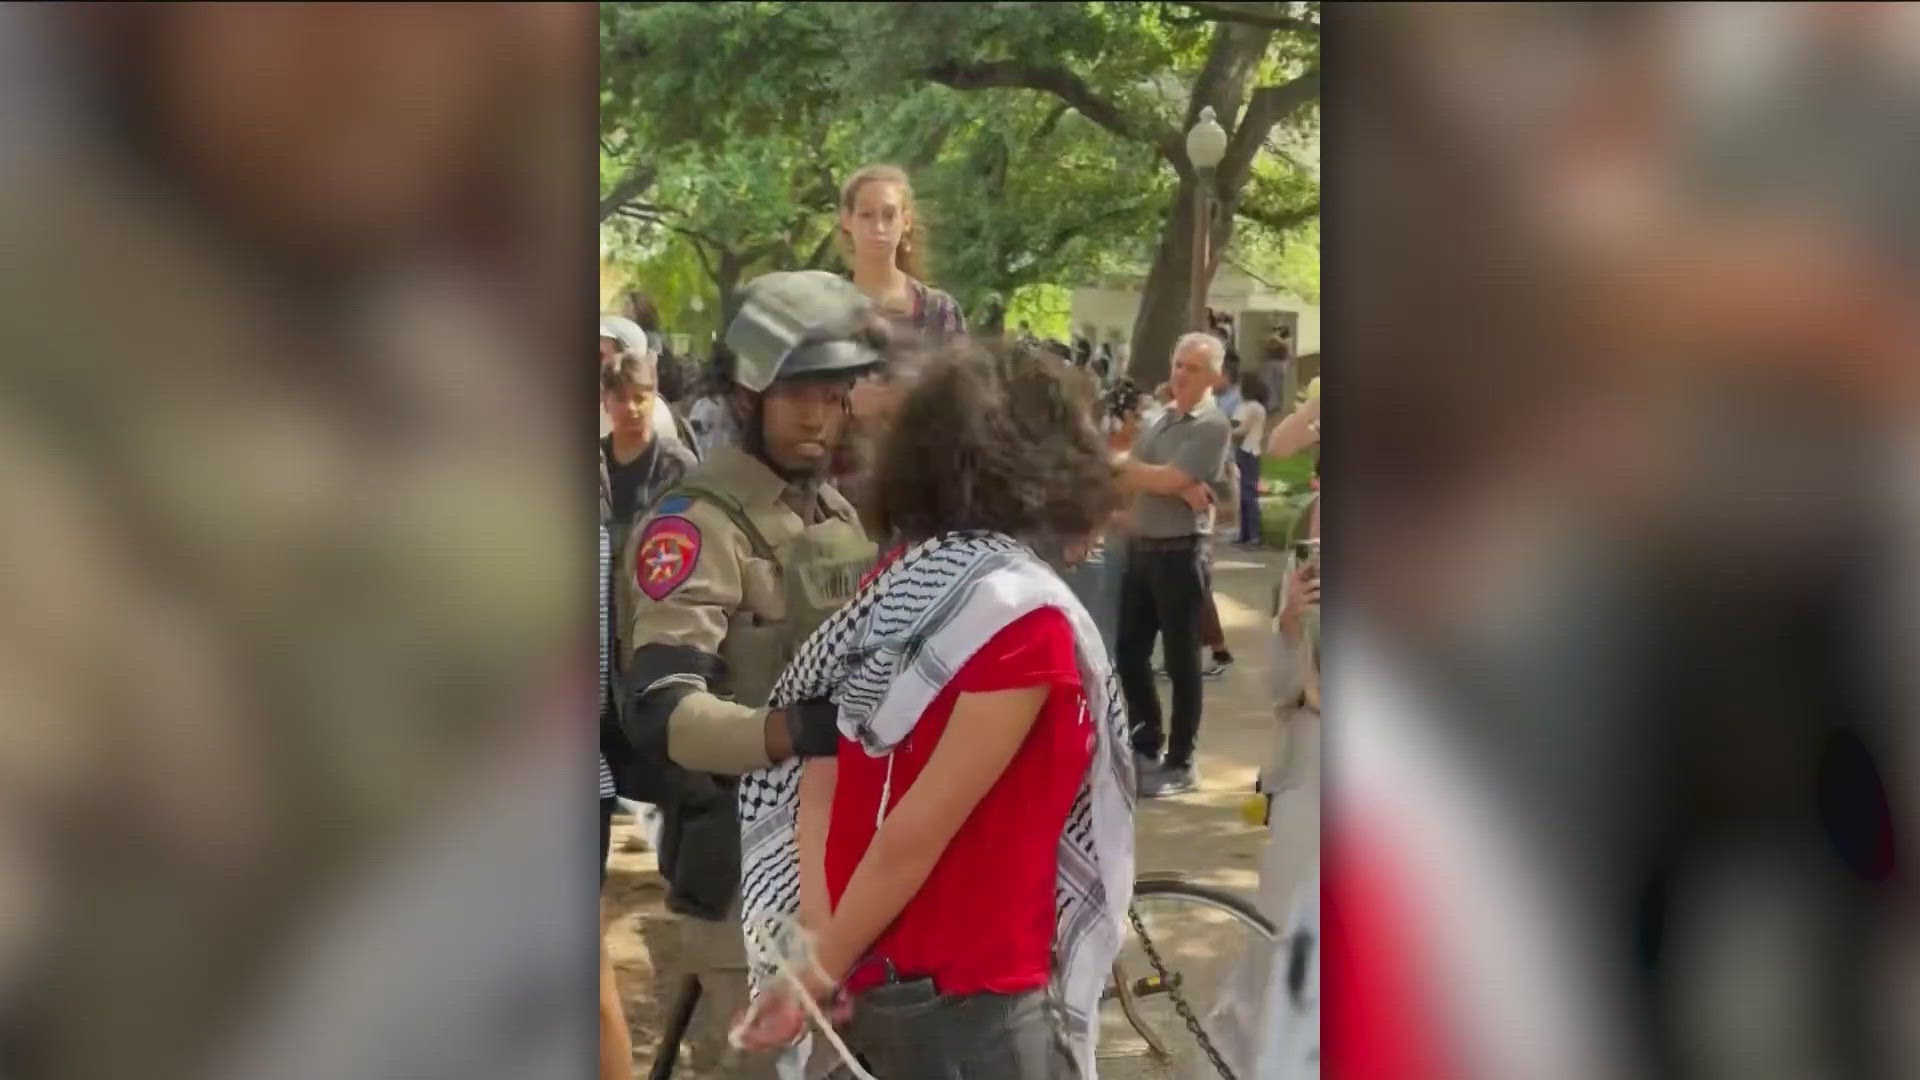 All of the people arrested during the Wednesday protest at the University of Texas at Austin have been released from jail as of Thursday afternoon.